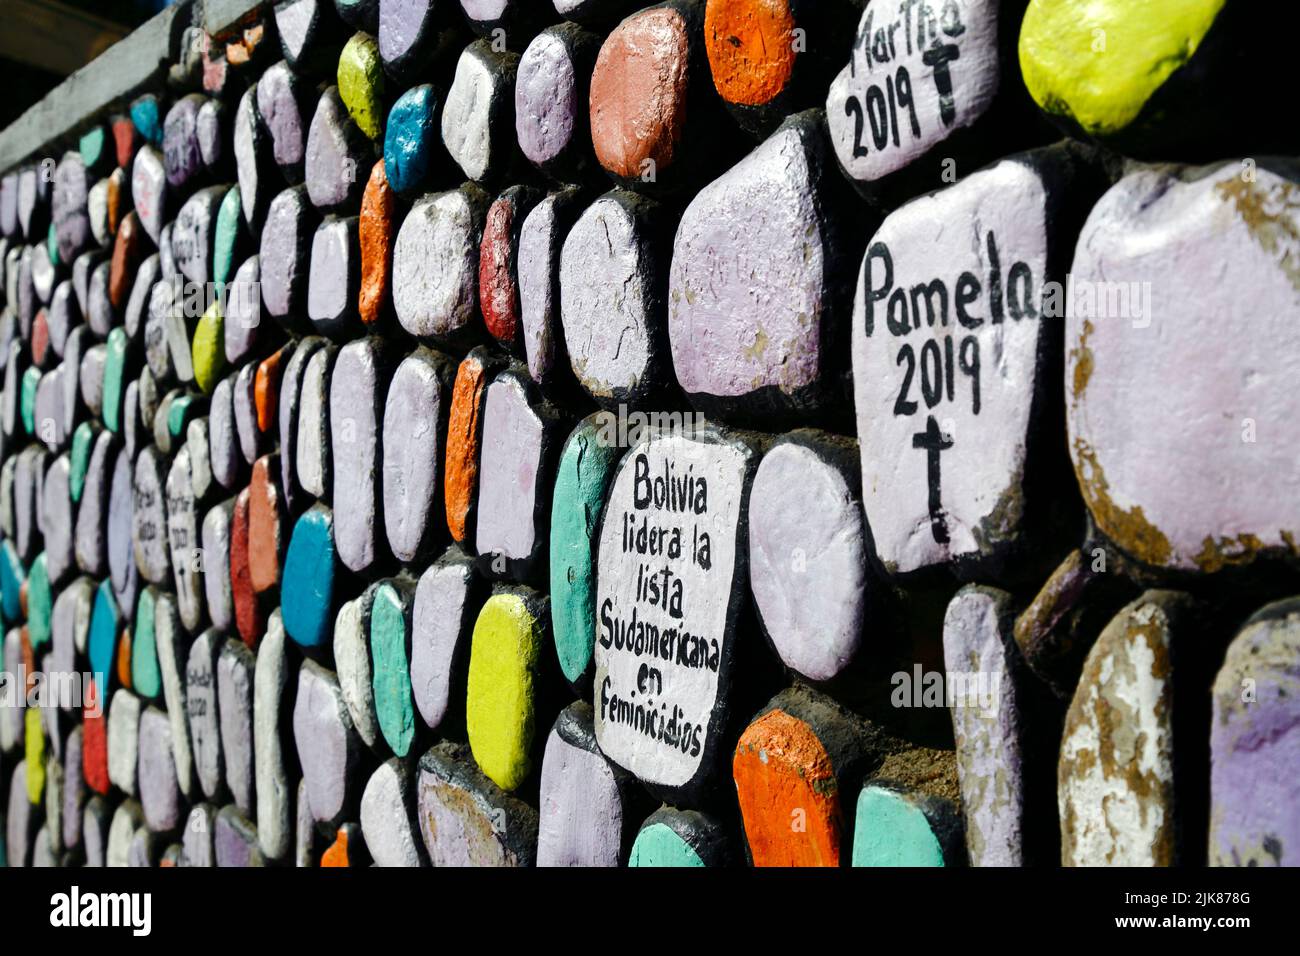 29th June 2022, Calacoto, La Paz, Bolivia. Detail of graffiti murals by feminist groups on a wall in La Paz's Zona Sur district protesting against violence against women, the number of femicides and slowness of the justice system in dealing with cases. Stock Photo